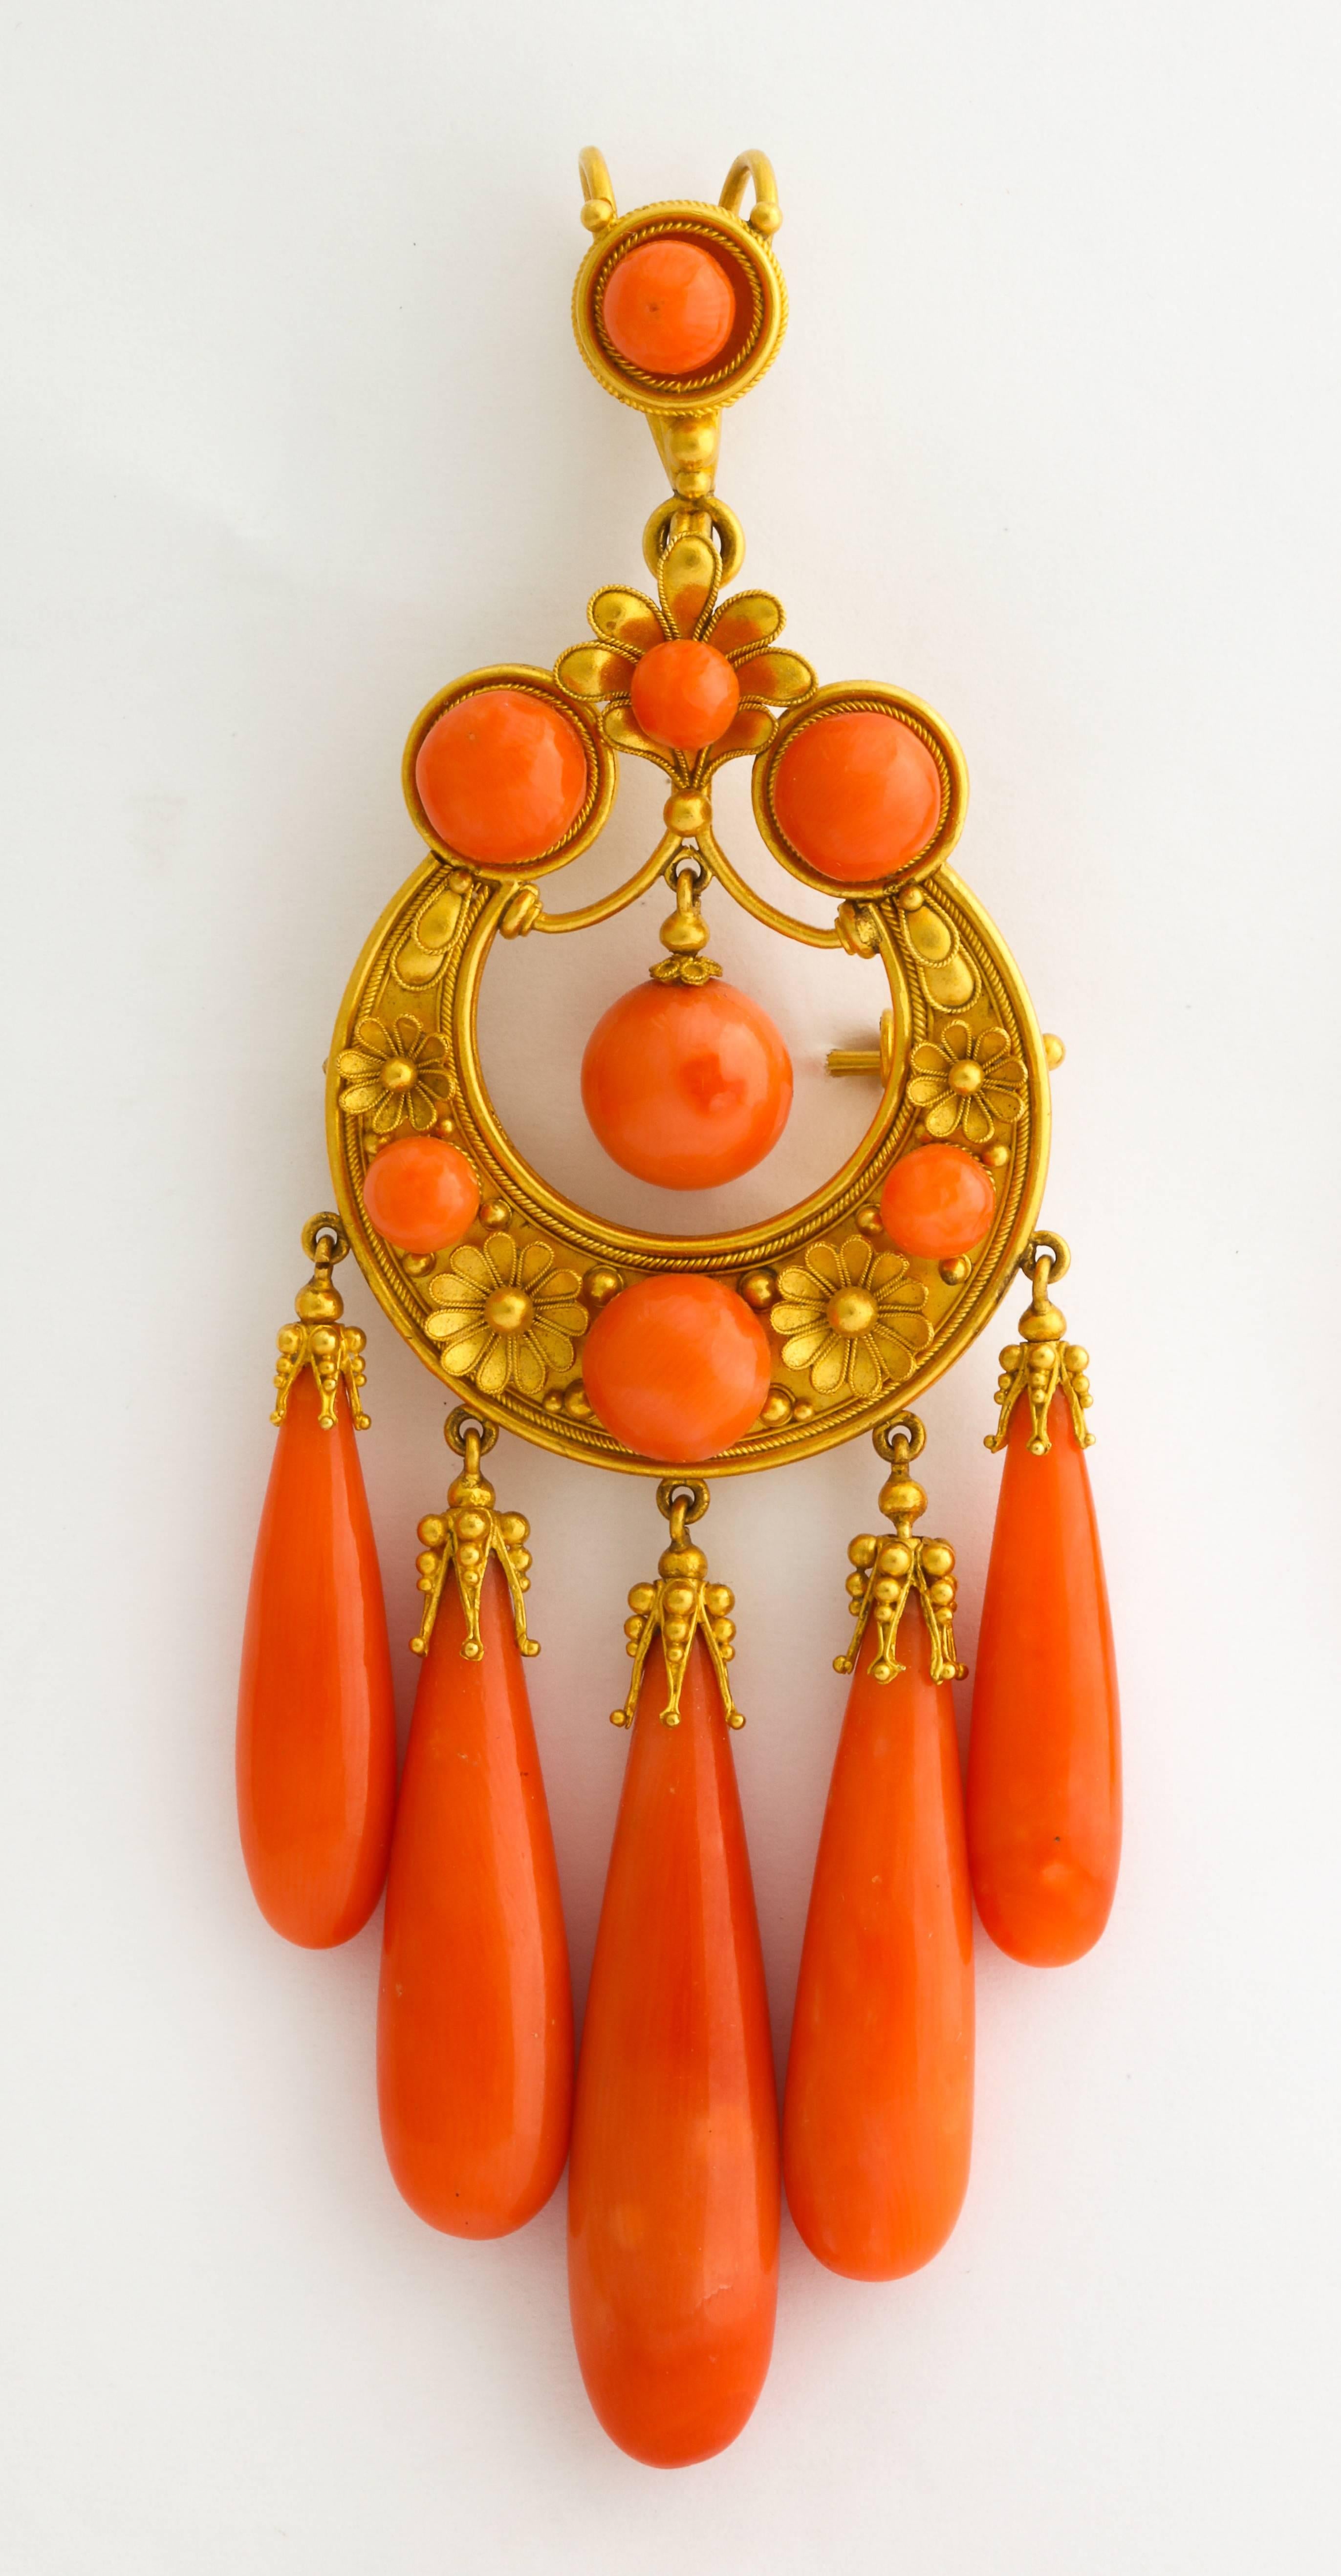 1850s Carved Coral and Gold Pendant Brooch and Earrings Suite In Excellent Condition For Sale In New York, NY